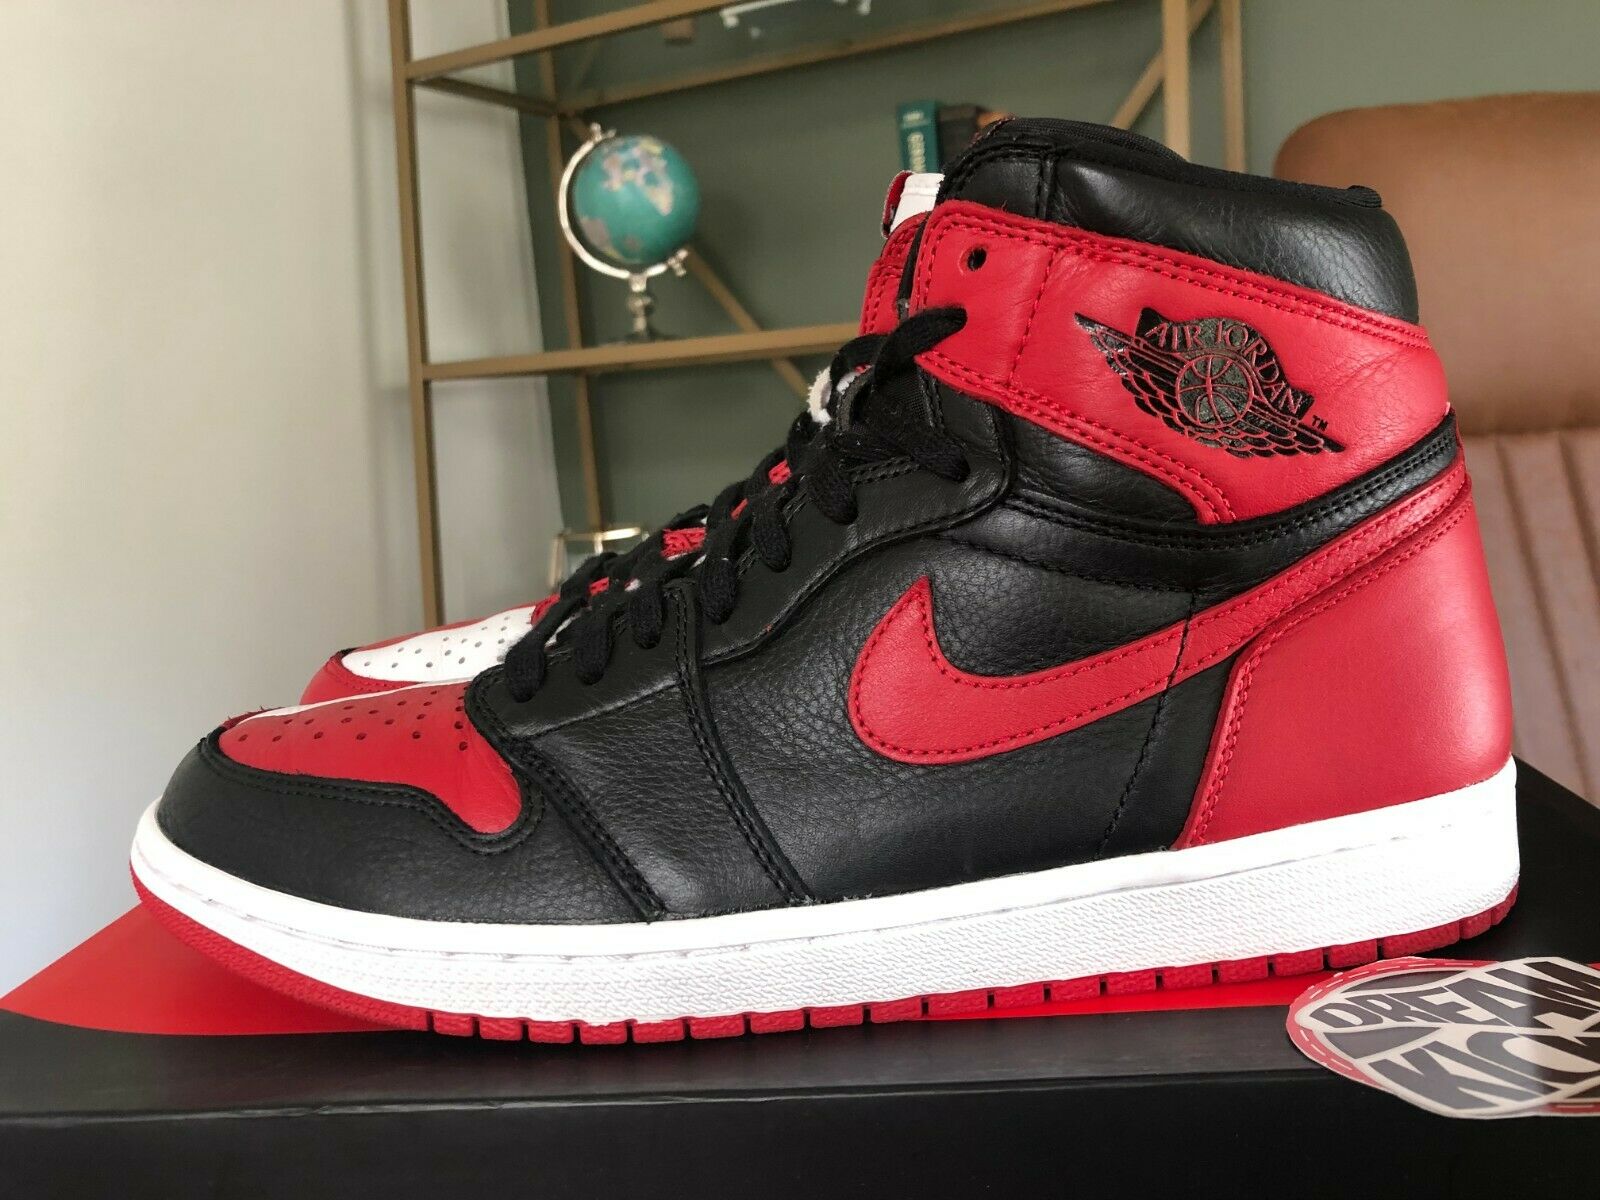 Jordan 1 Retro High Homage To Home Non-numbered